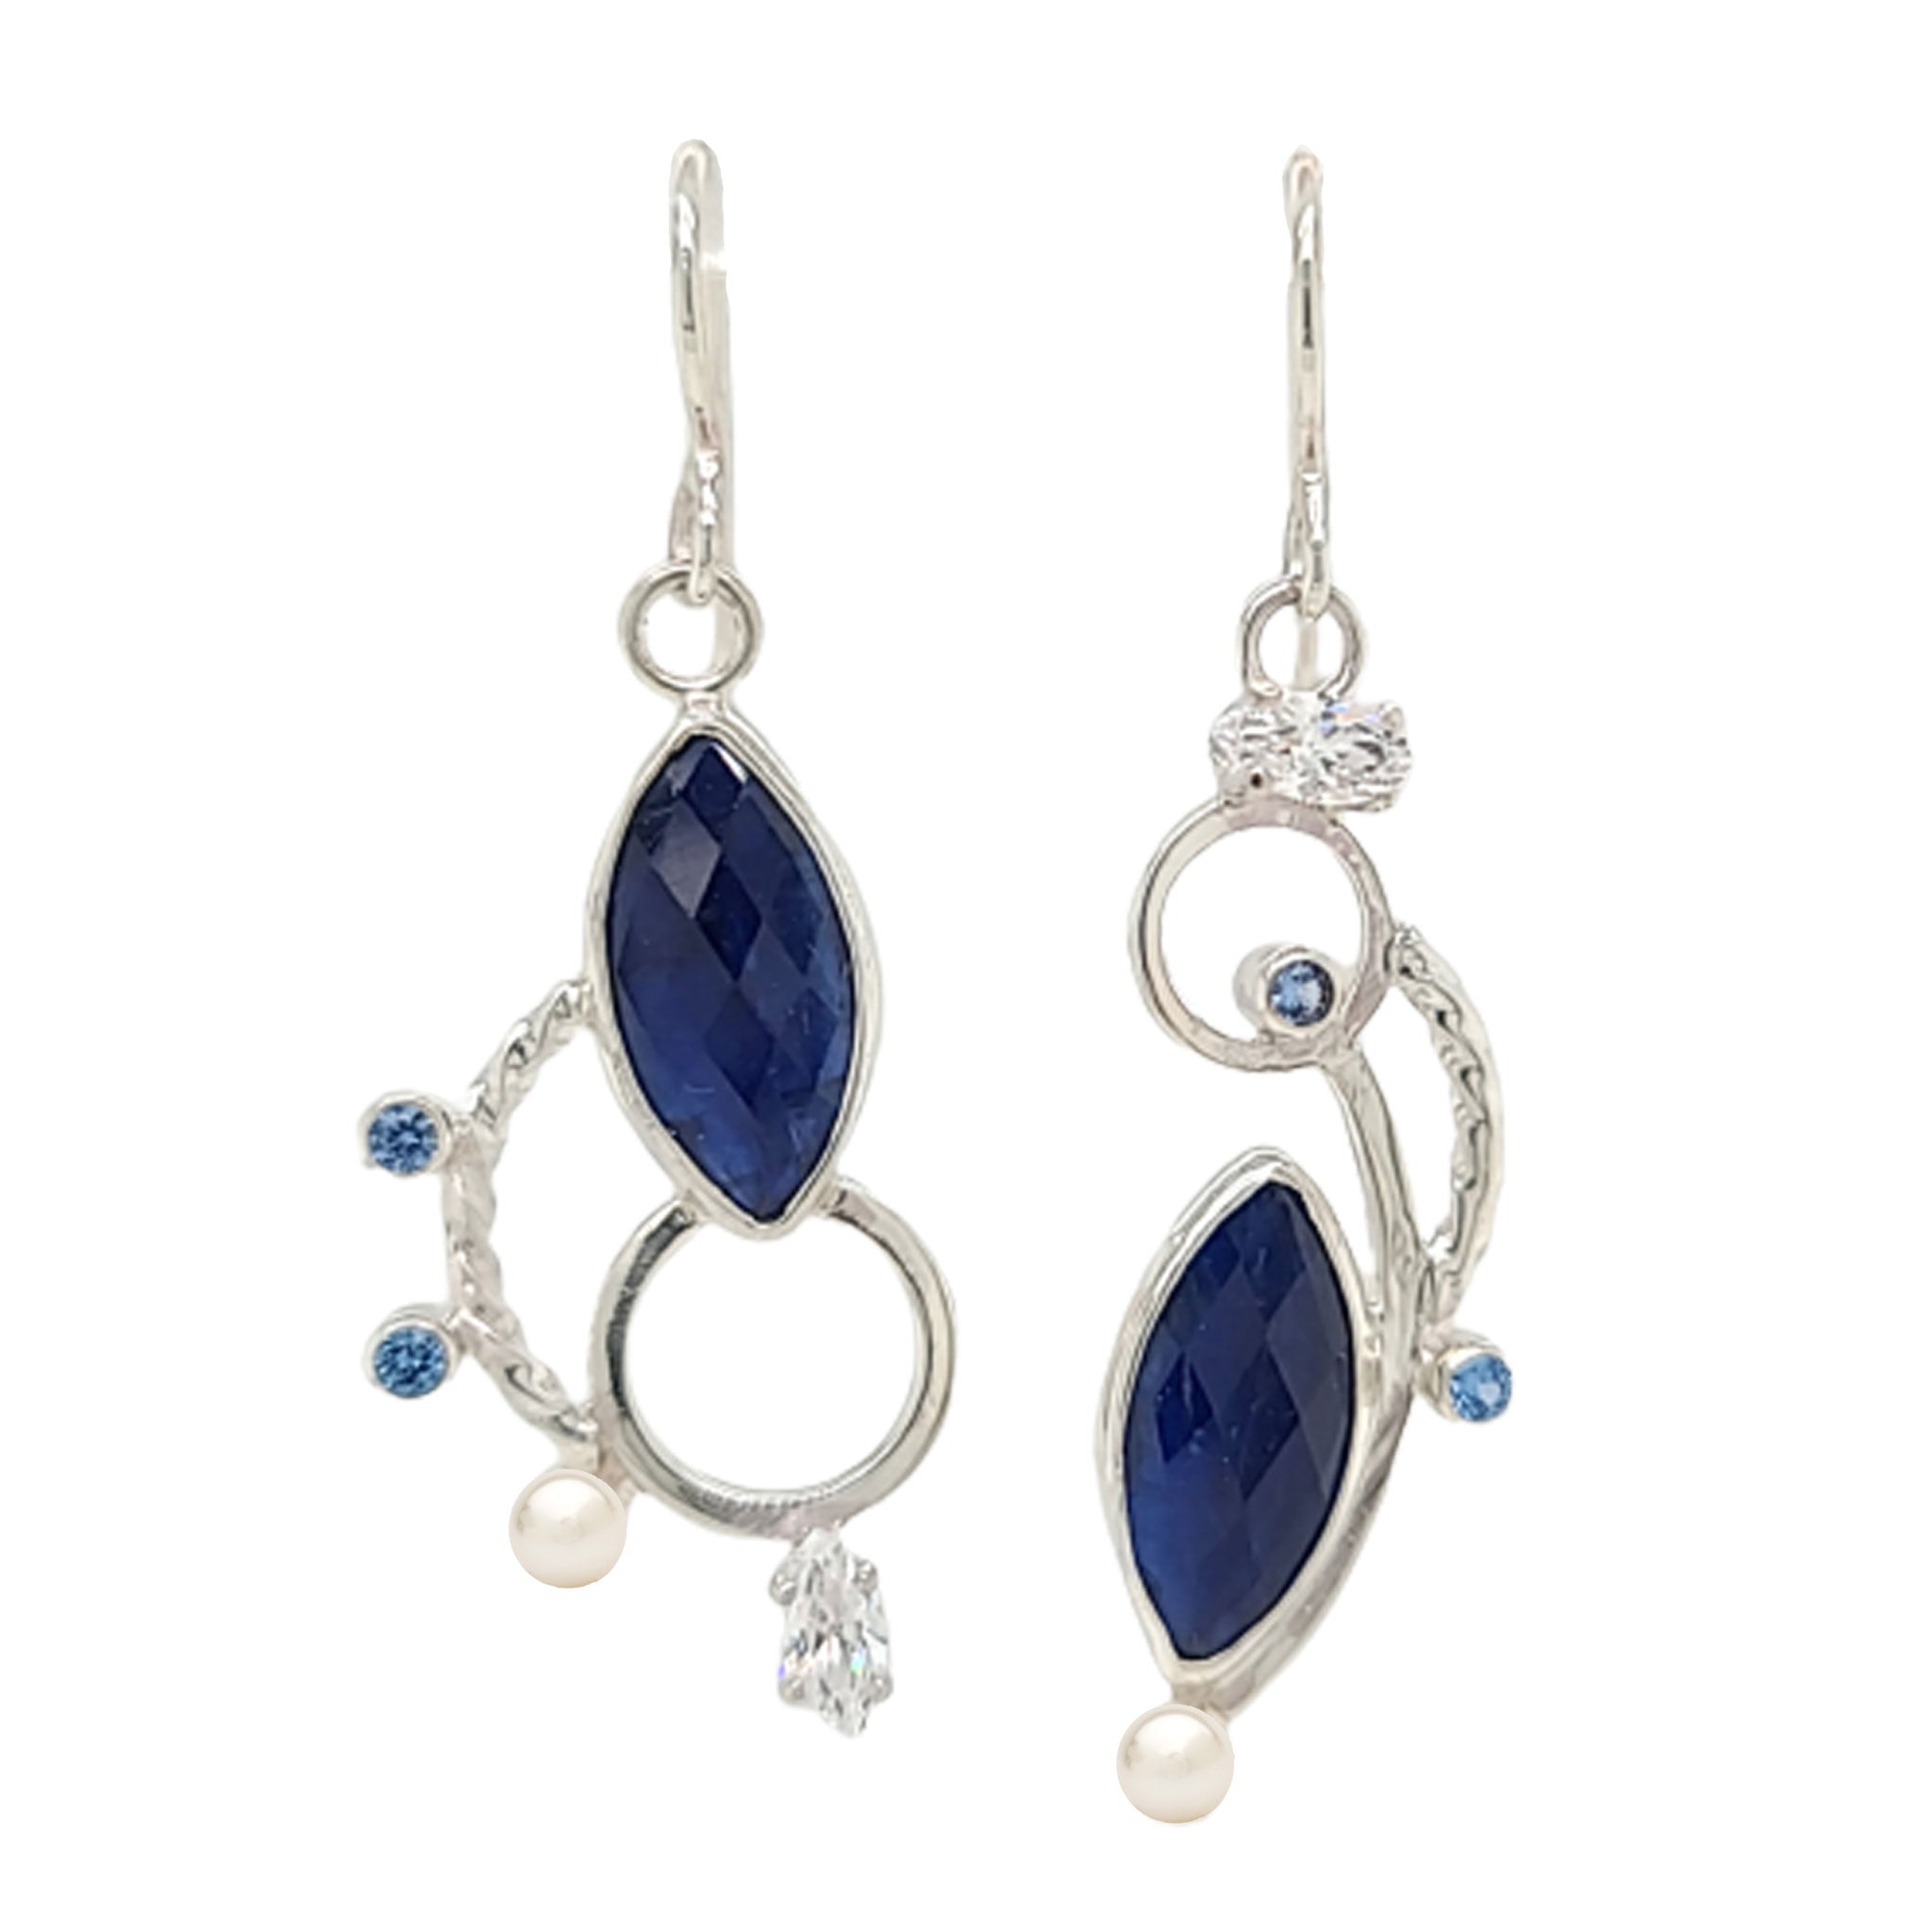 Royal Blue Kyanite, Lab Spinel, Cubic Zirconia and Freshwater Pearl asymmetric earrings set in Sterling Silver